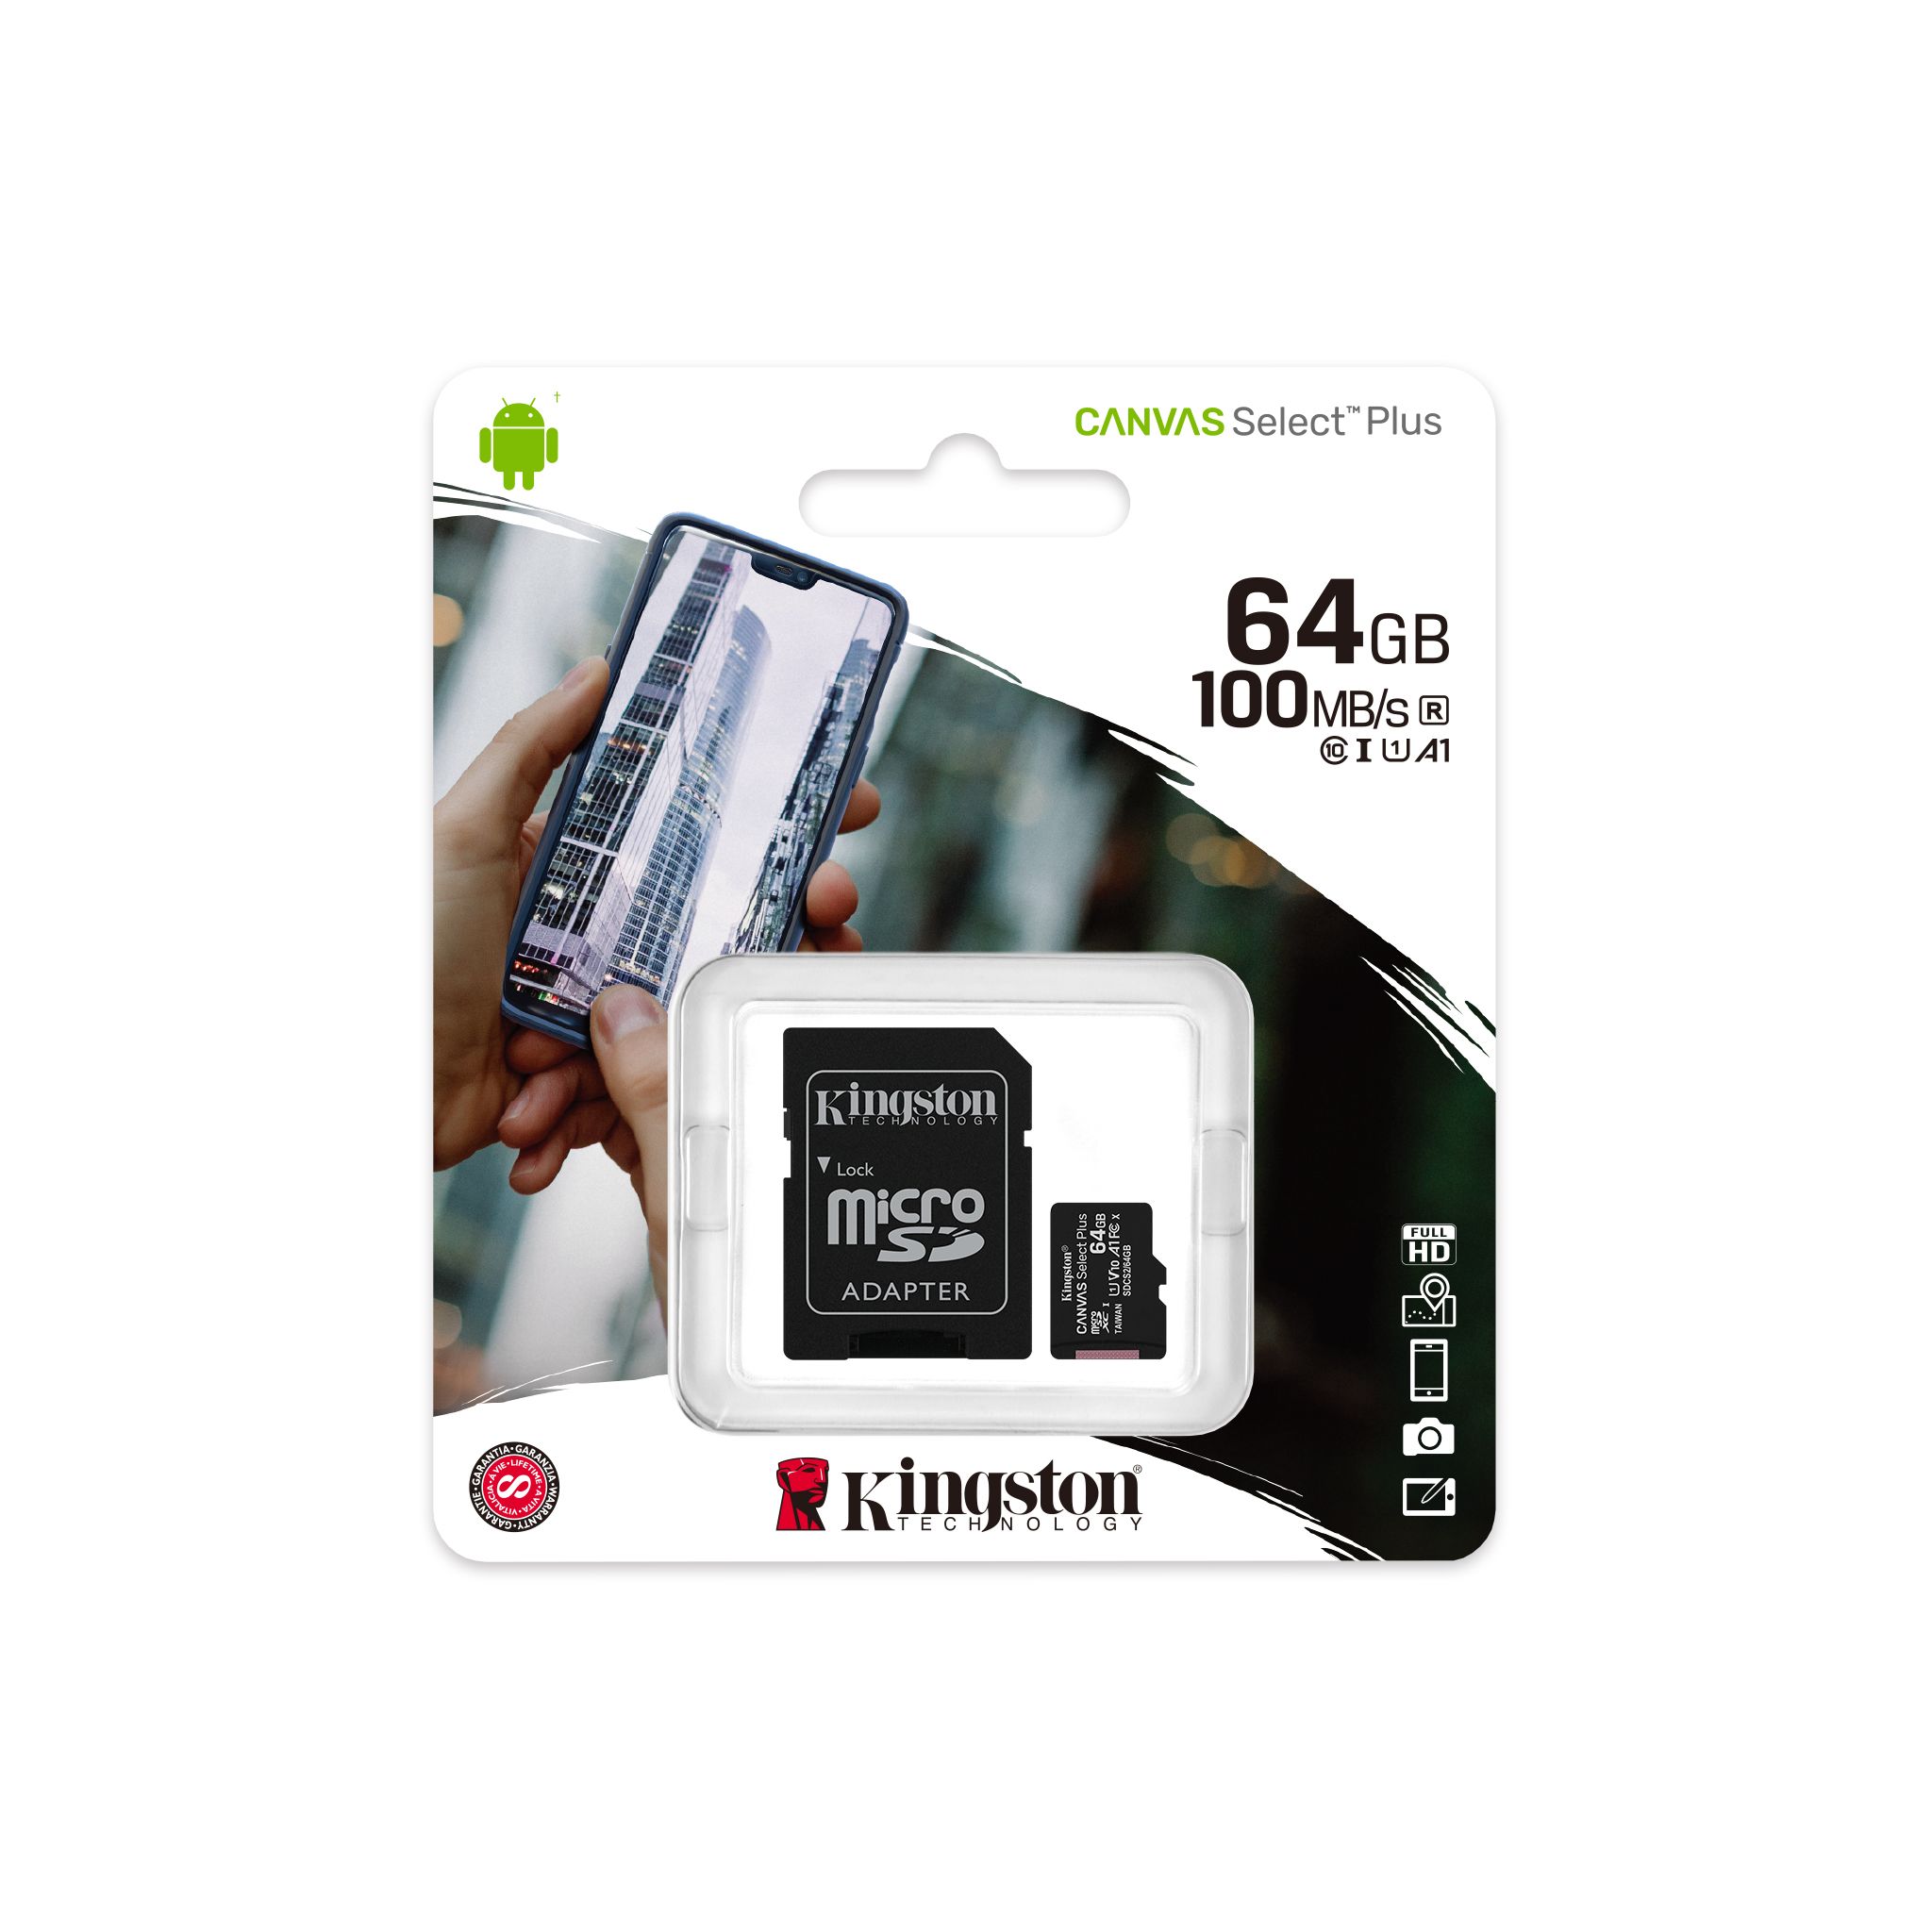 100MBs Works with Kingston Kingston 64GB Sony G3212 MicroSDXC Canvas Select Plus Card Verified by SanFlash.